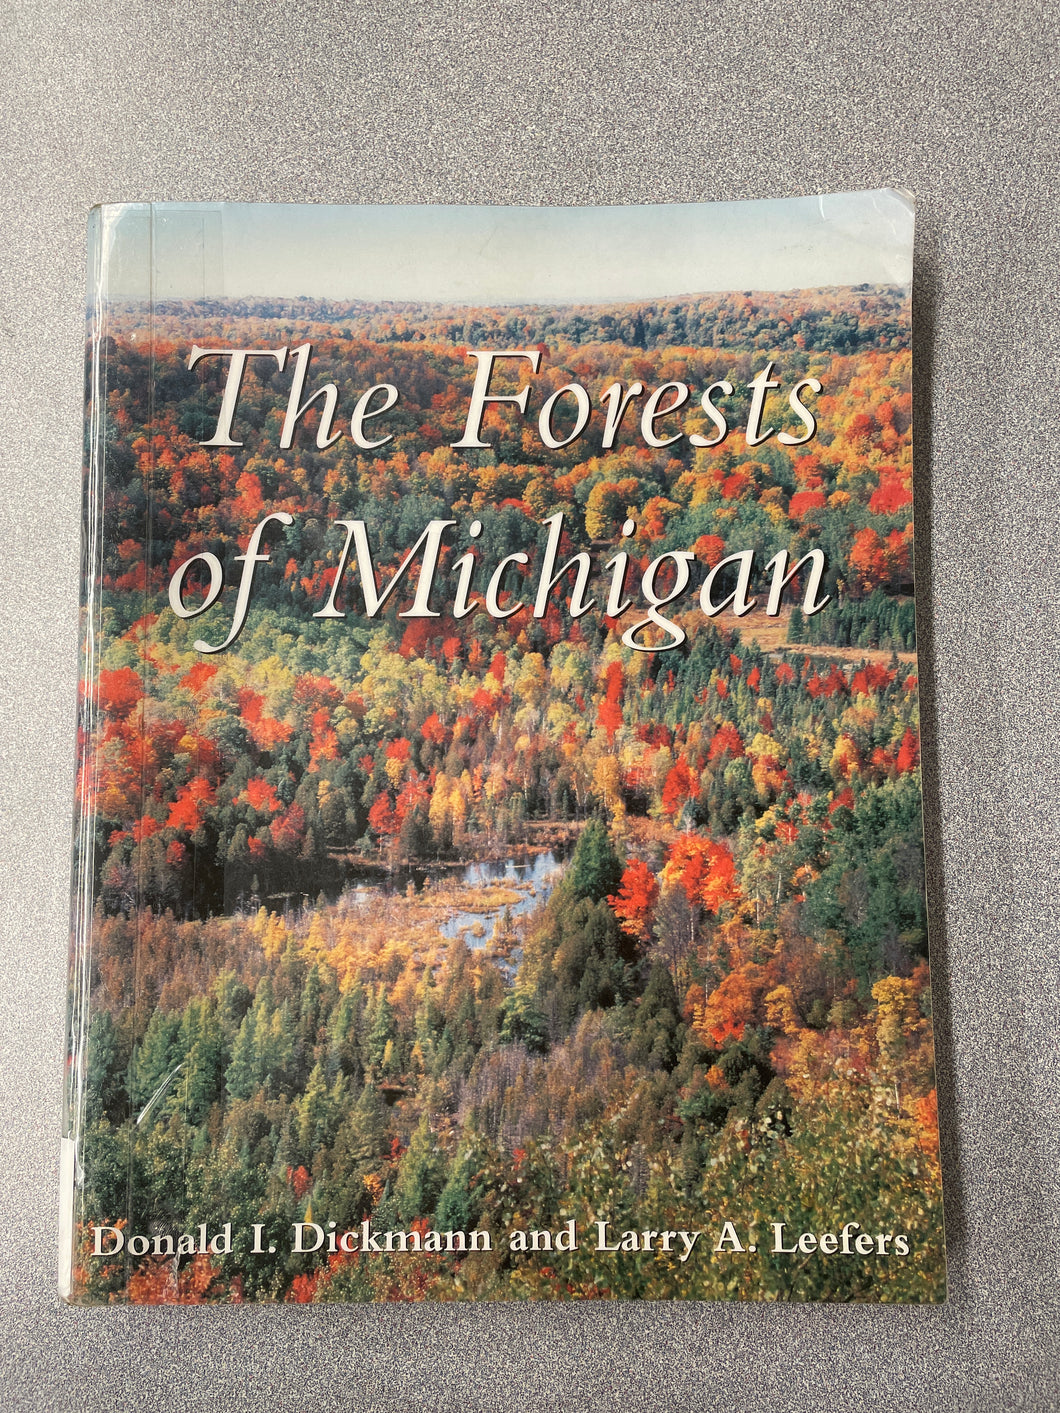 MI  The Forests of Michigan, Dickmann, Donald I. and Larry A. Leefers [2003] N 3/24